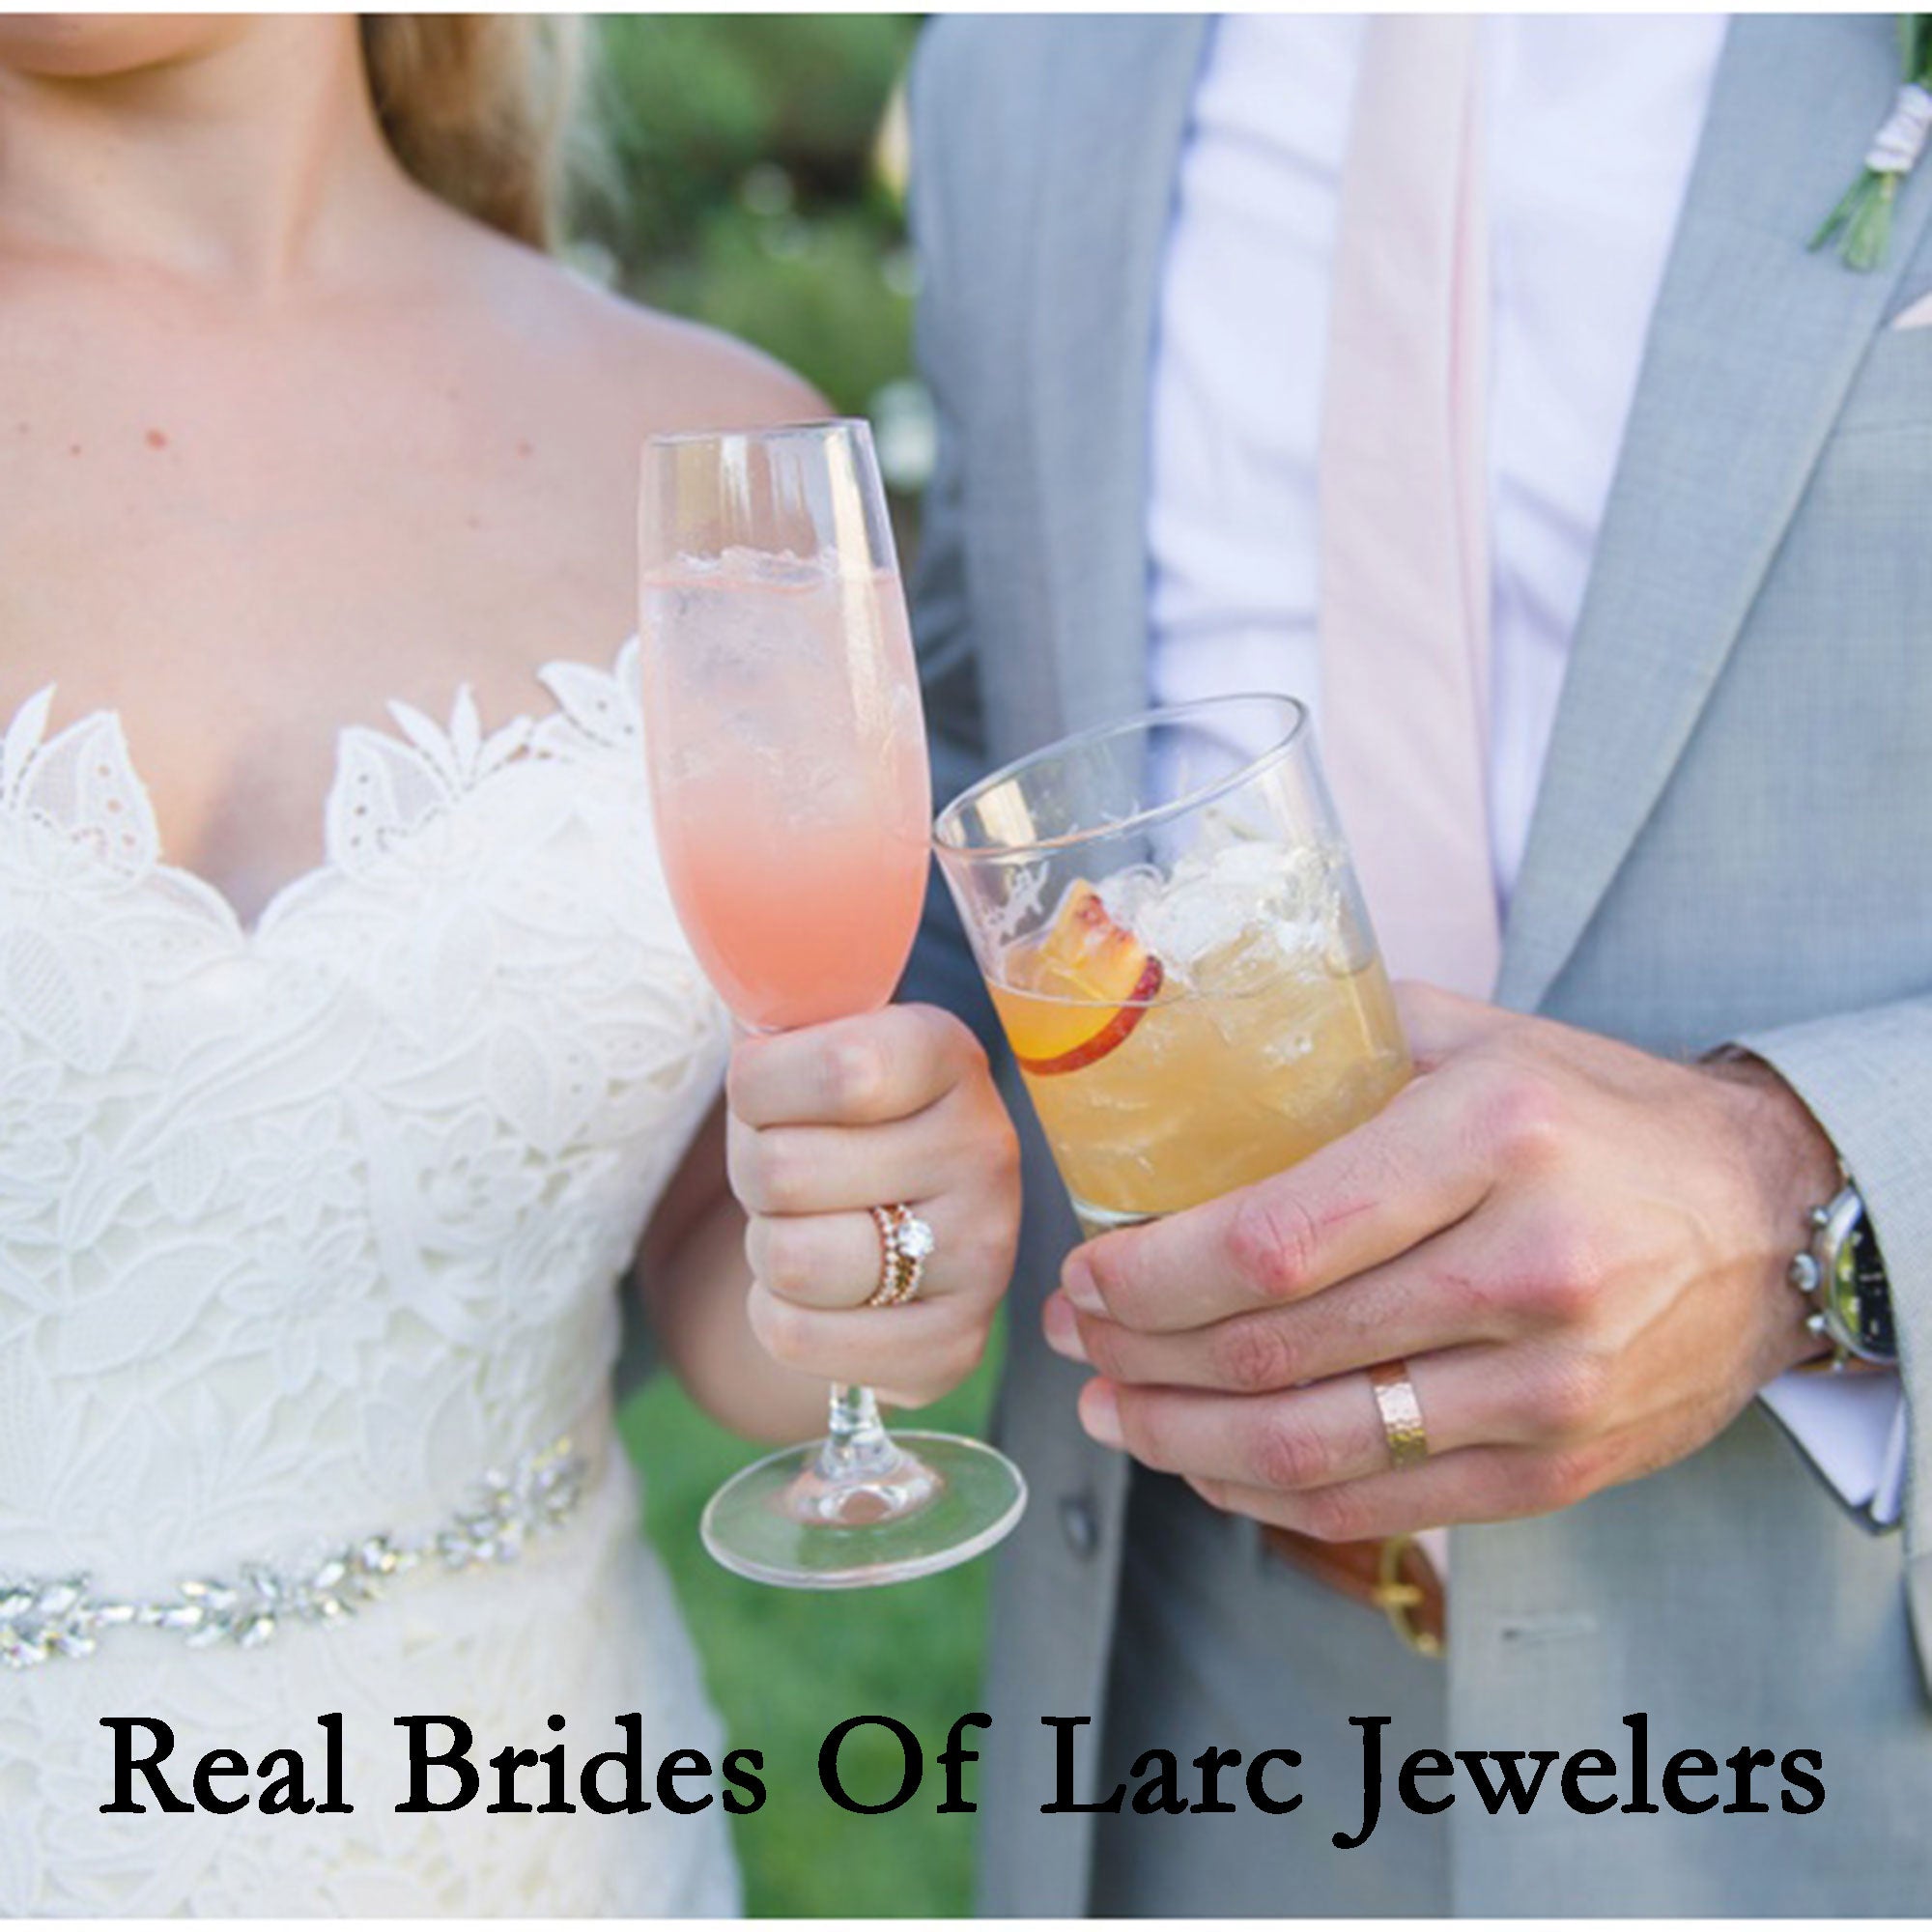 Real Brides of Larc Jewelers